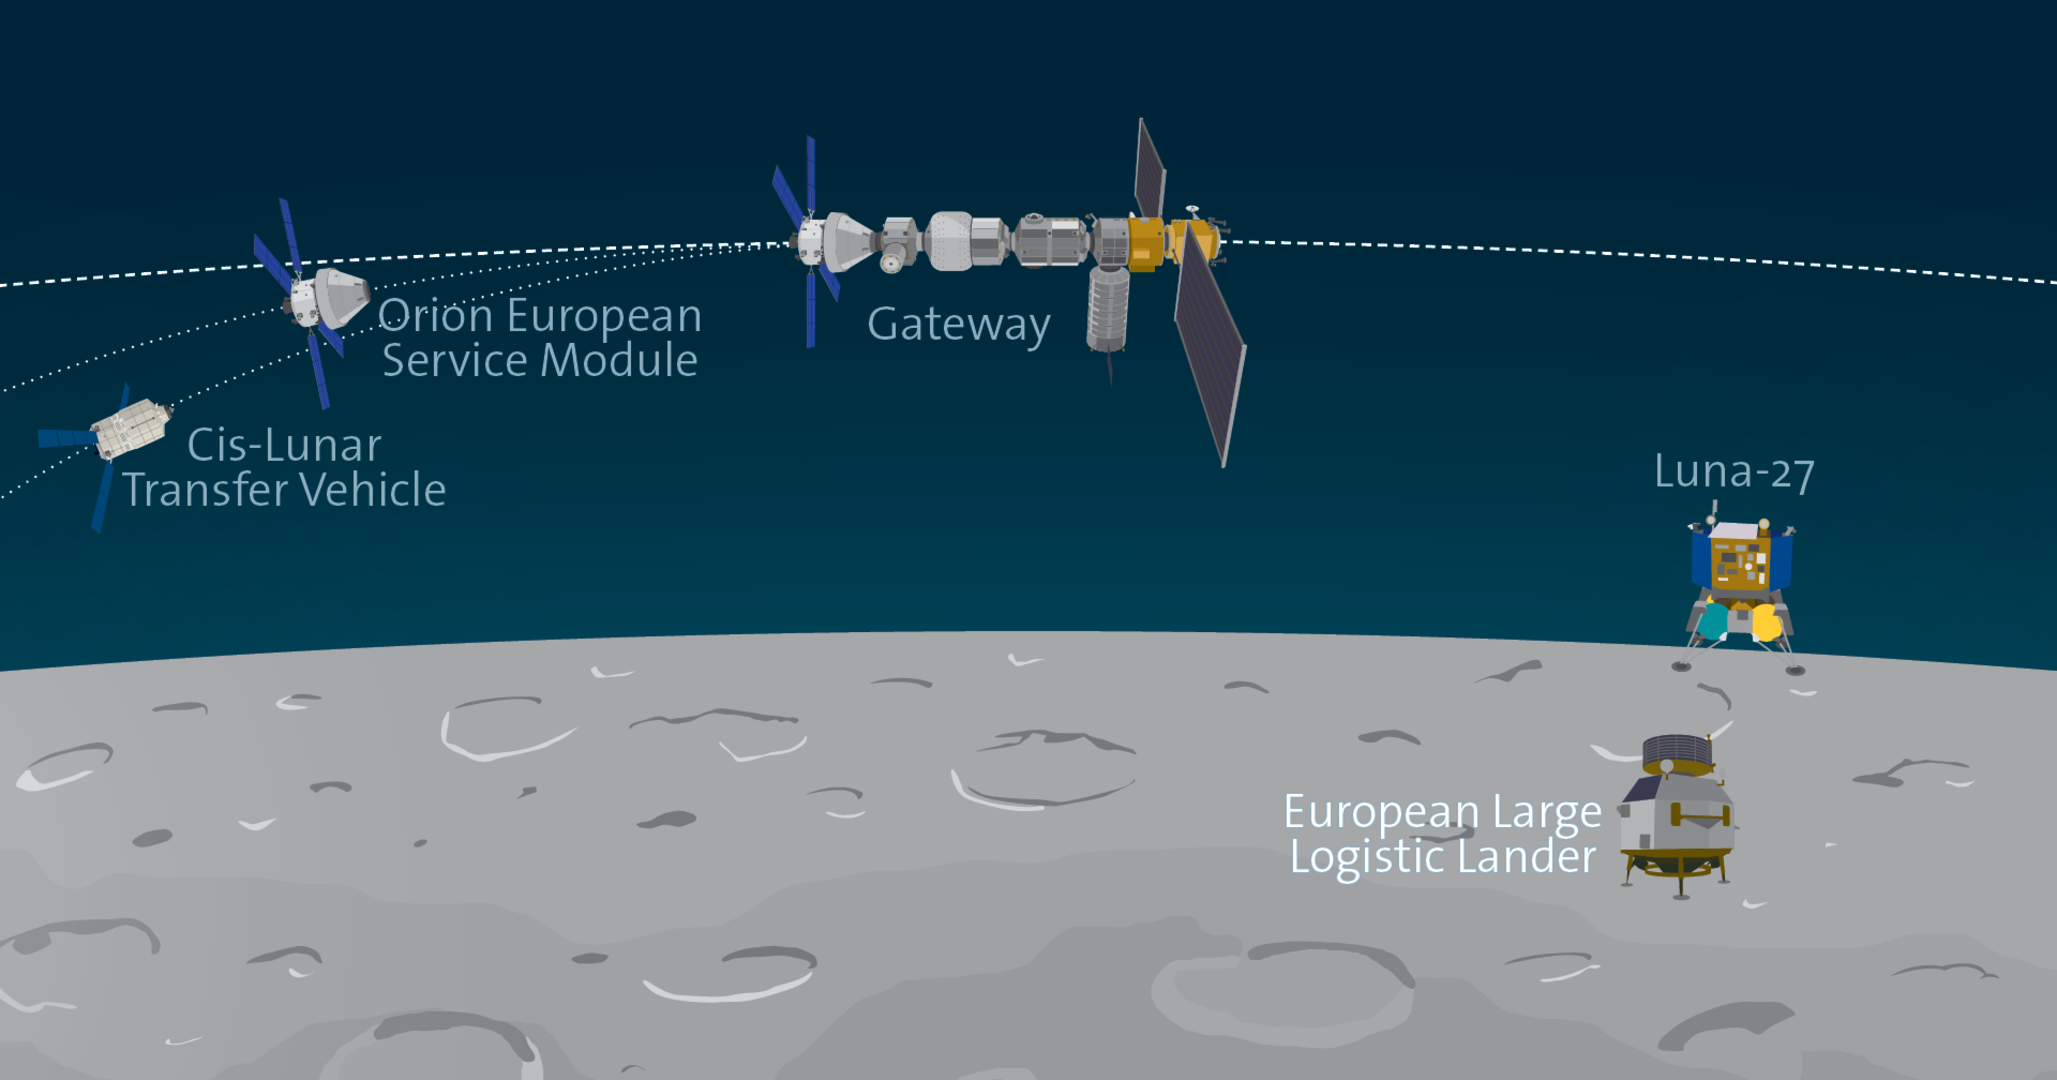 Overview of lunar missions with ESA involvement